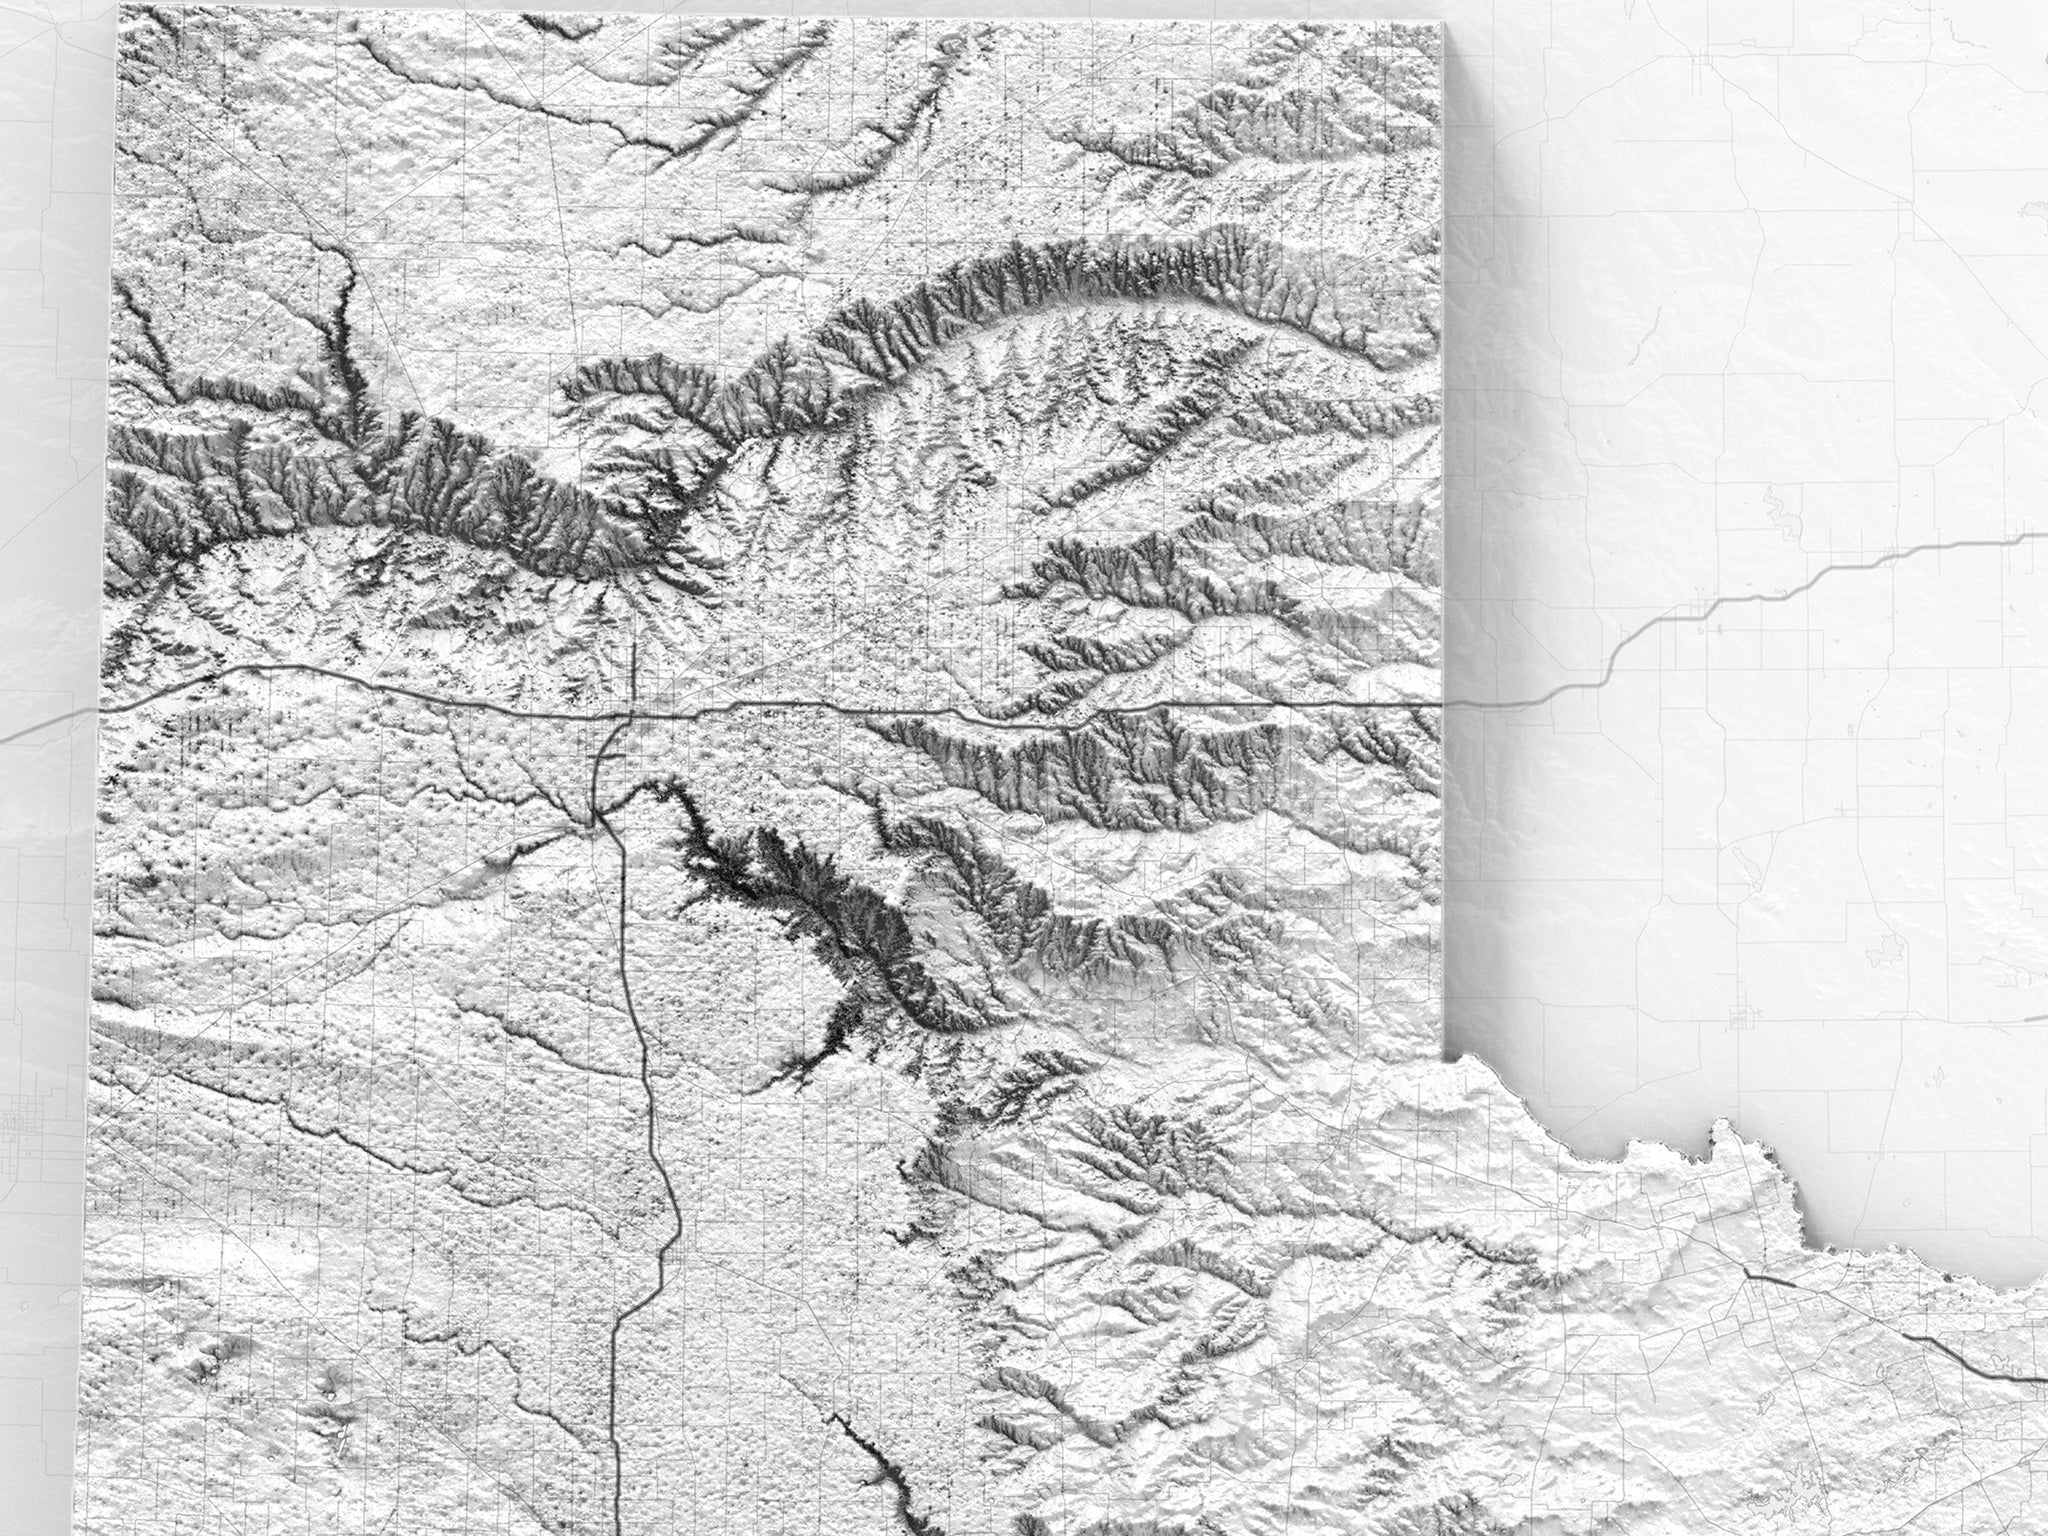 Texas panhandle shaded relief